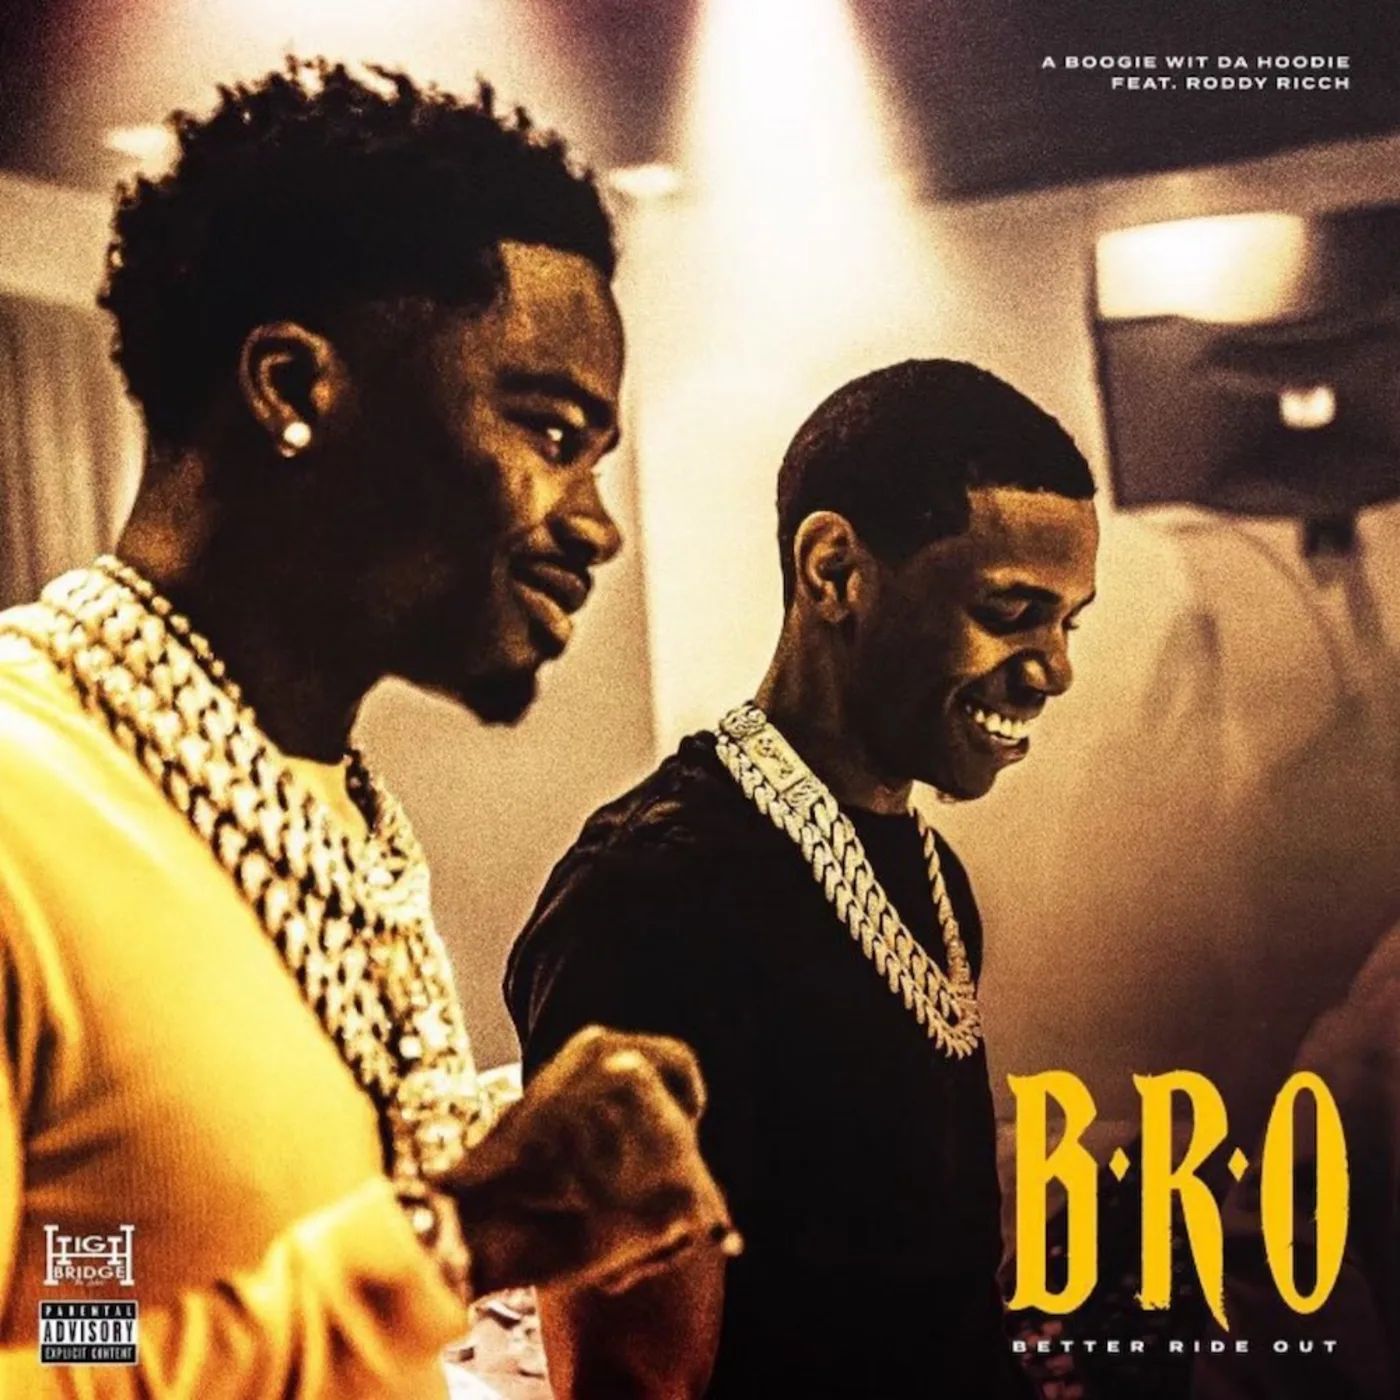 A Boogie wit da Hoodie  B.R.O. (Better Ride Out) MP3 